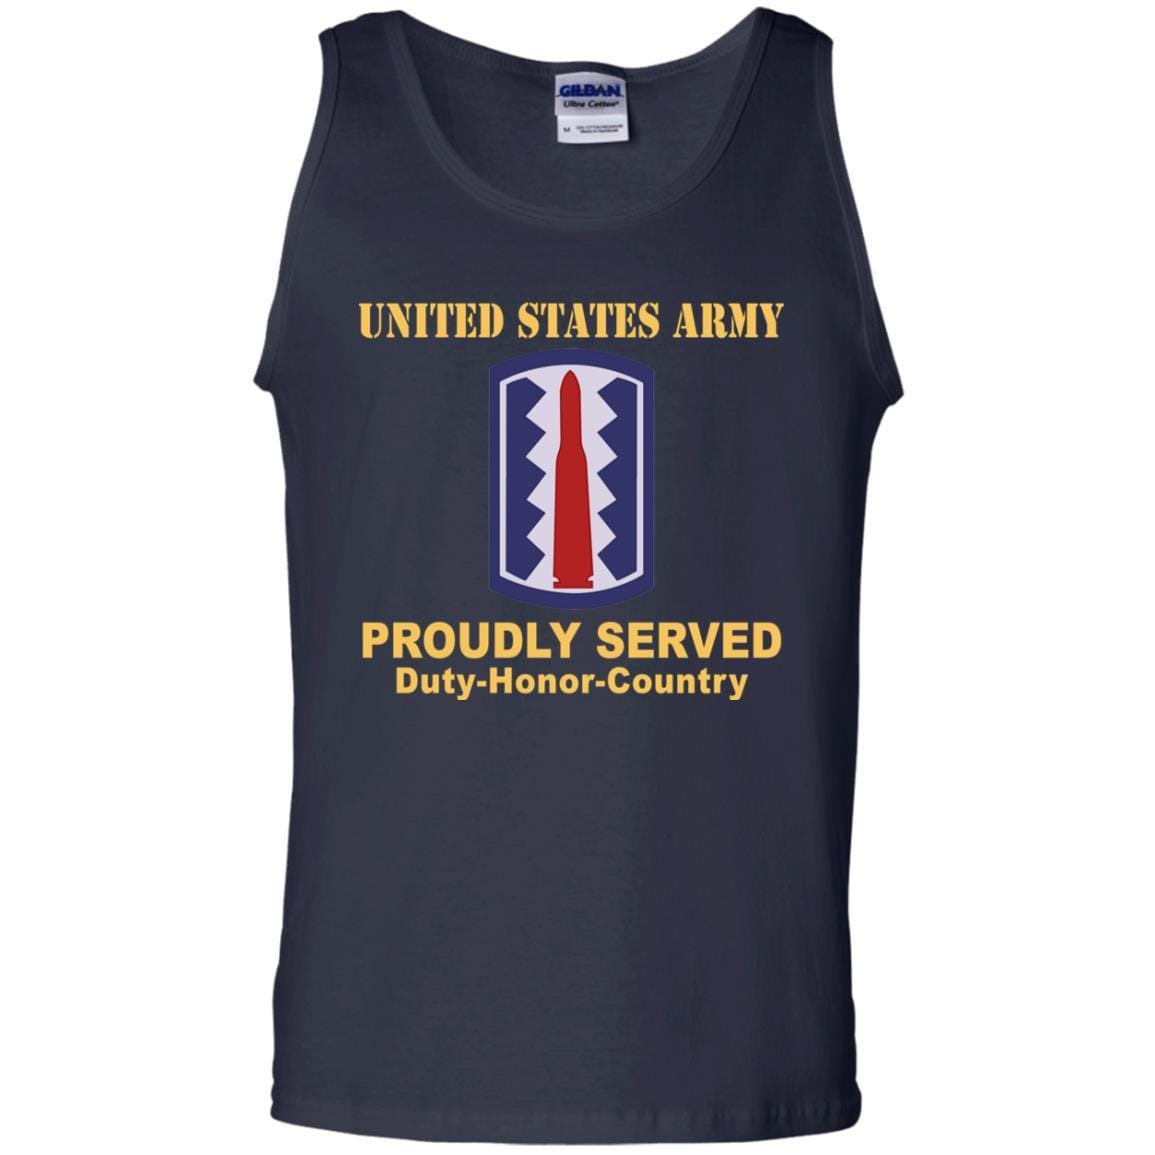 US ARMY 197TH INFANTRY BRIGADE - Proudly Served T-Shirt On Front For Men-TShirt-Army-Veterans Nation